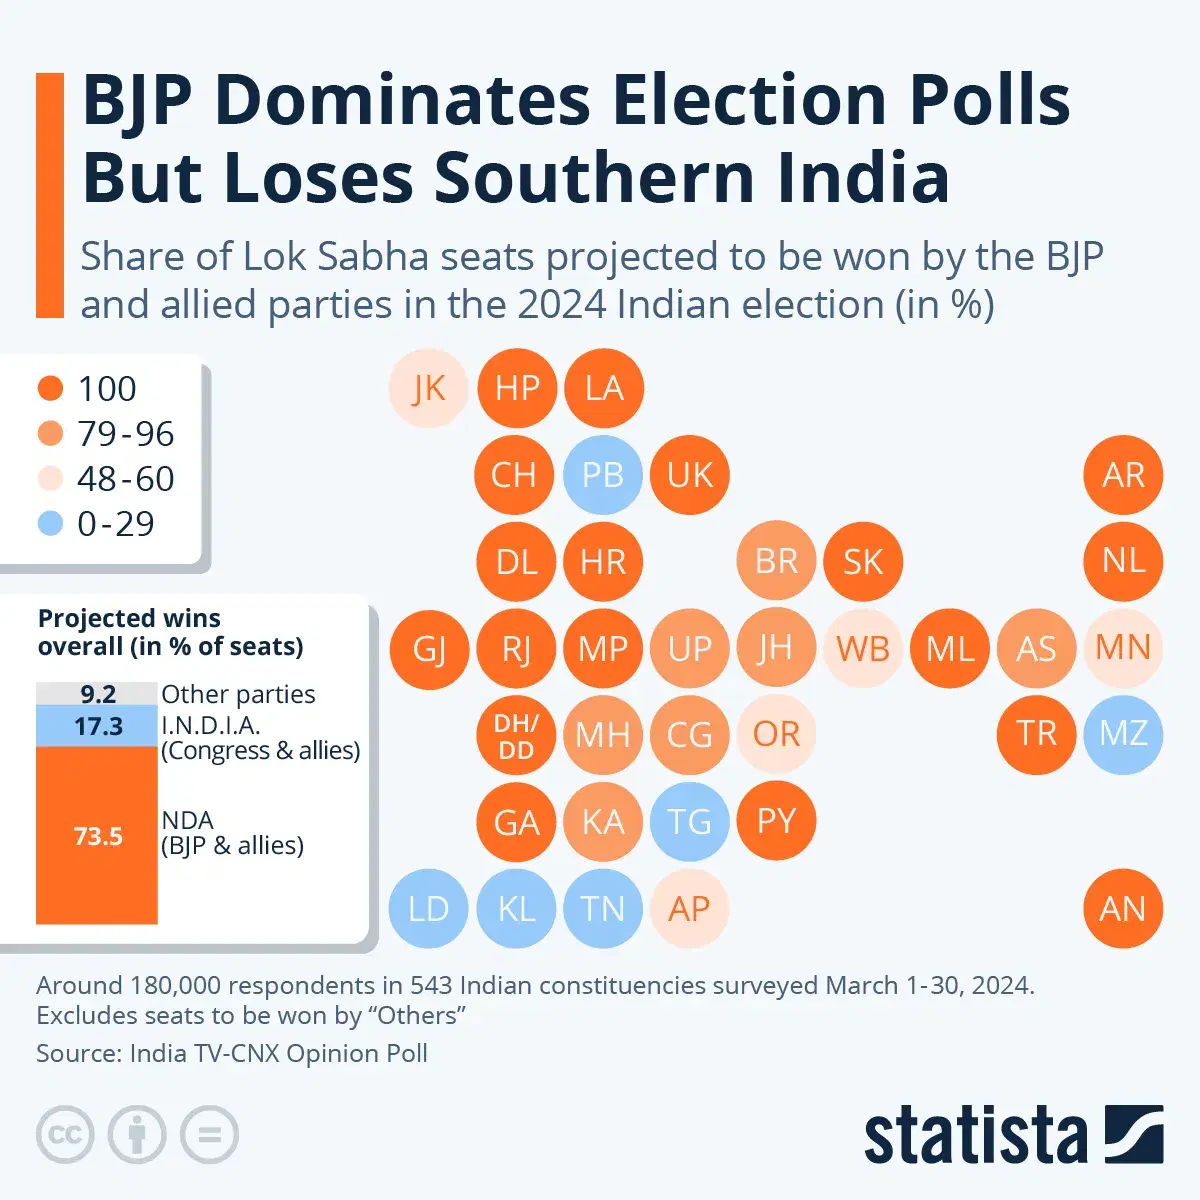 BJP Dominates Election Polls But Loses Southern India